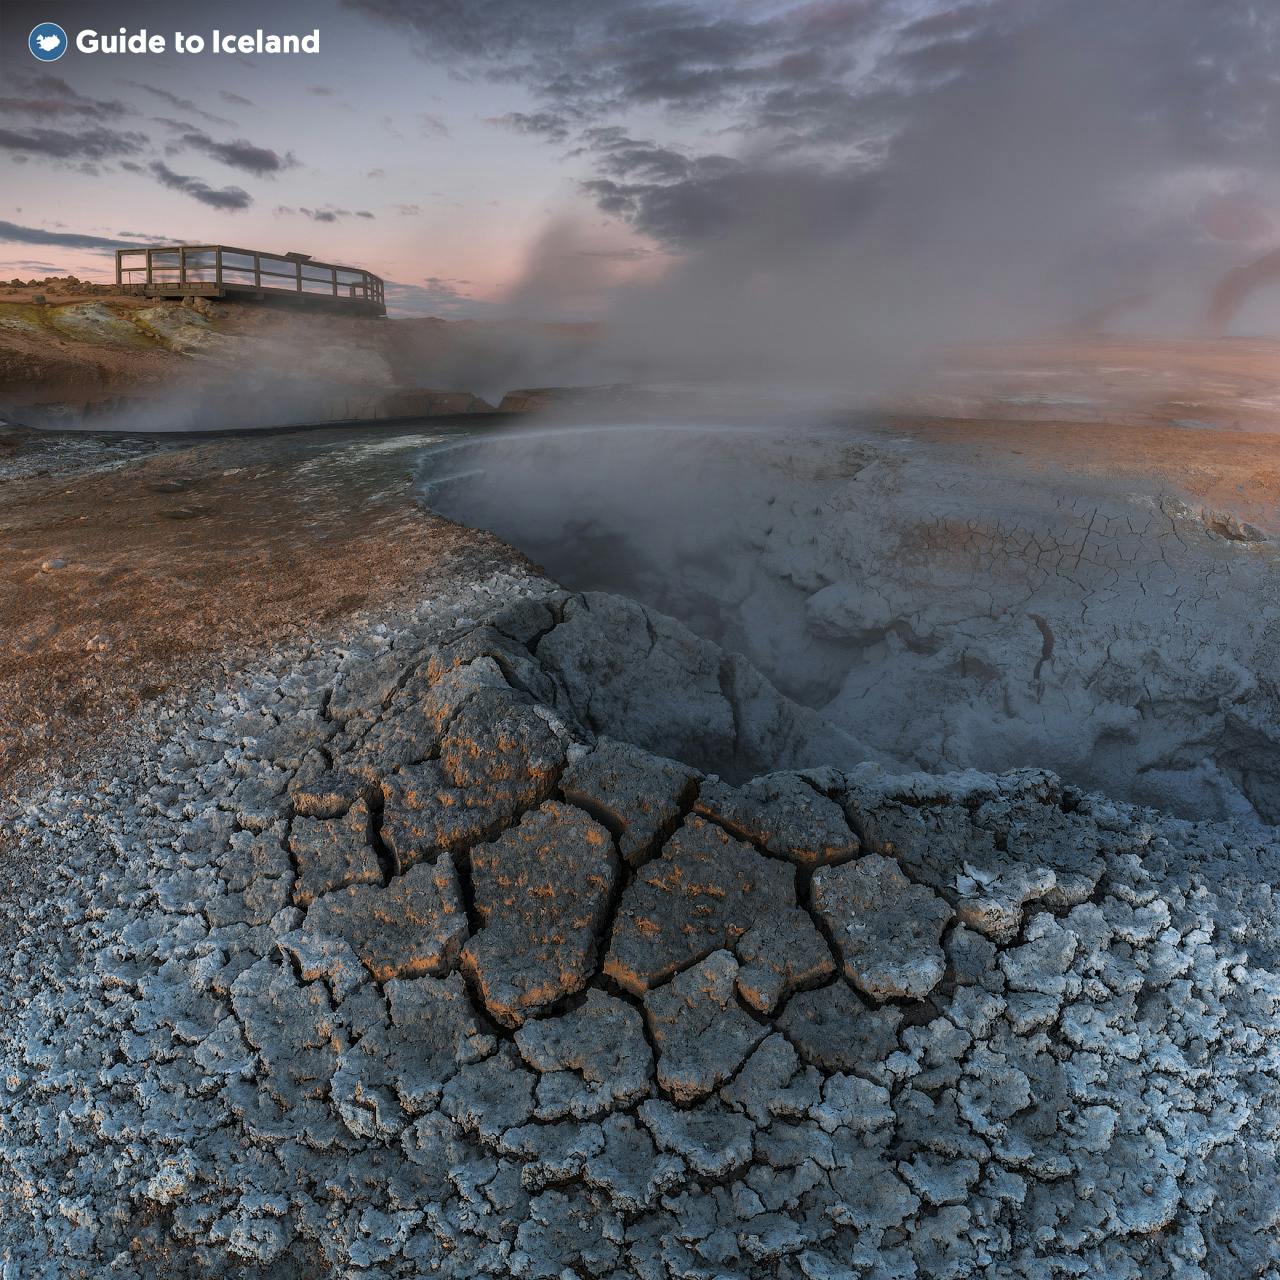 An image of the Geothermal North of Iceland.